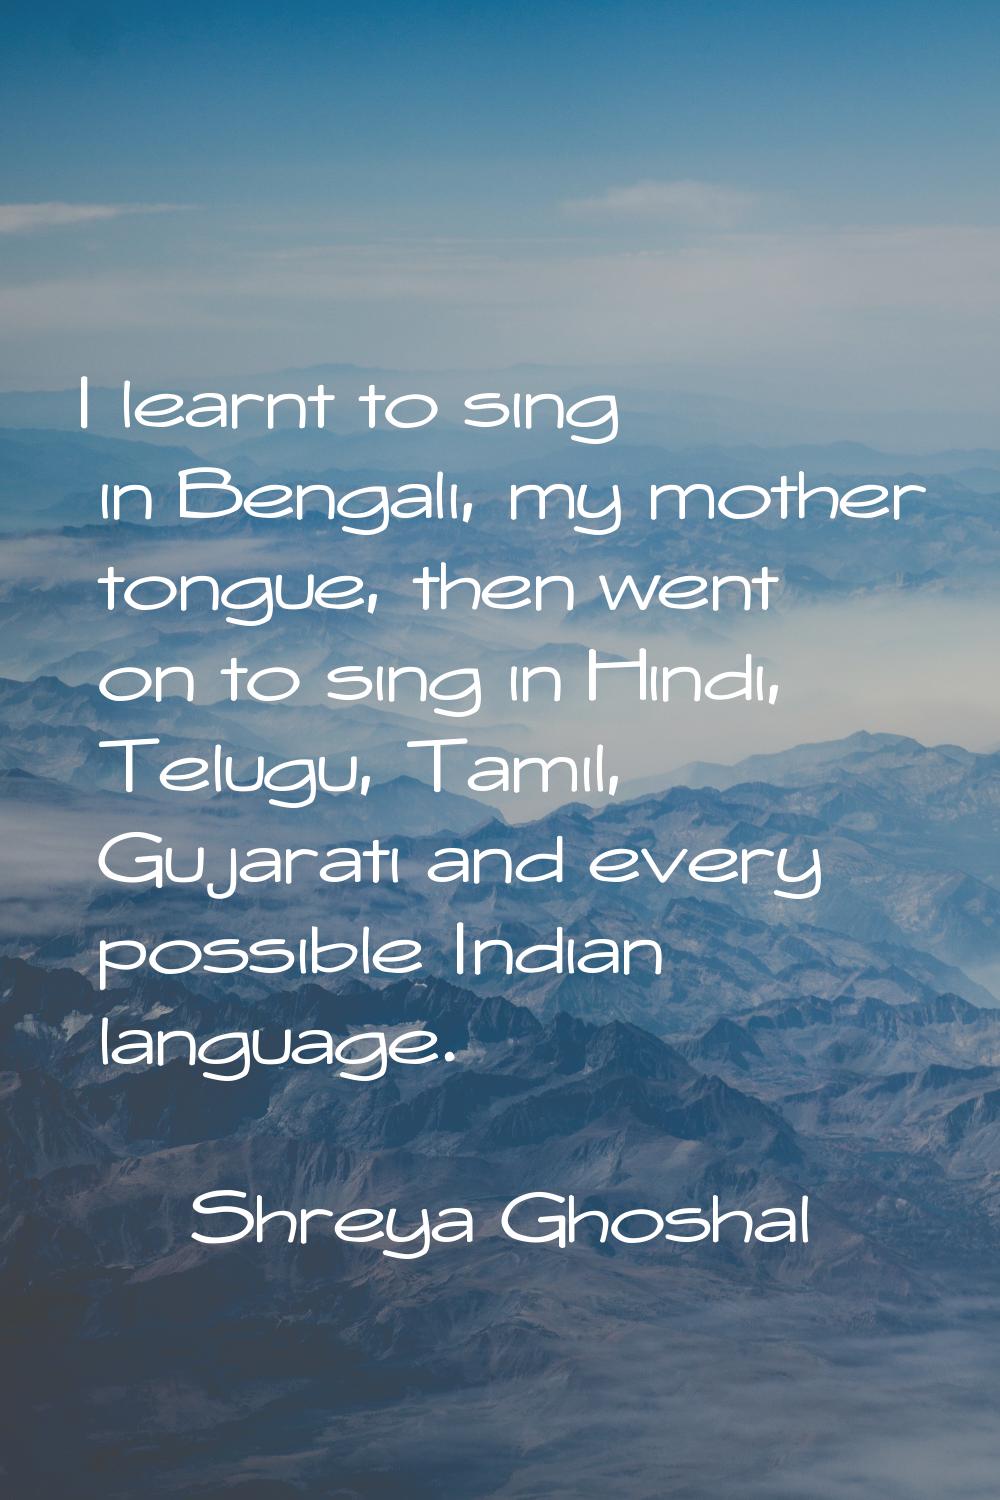 I learnt to sing in Bengali, my mother tongue, then went on to sing in Hindi, Telugu, Tamil, Gujara